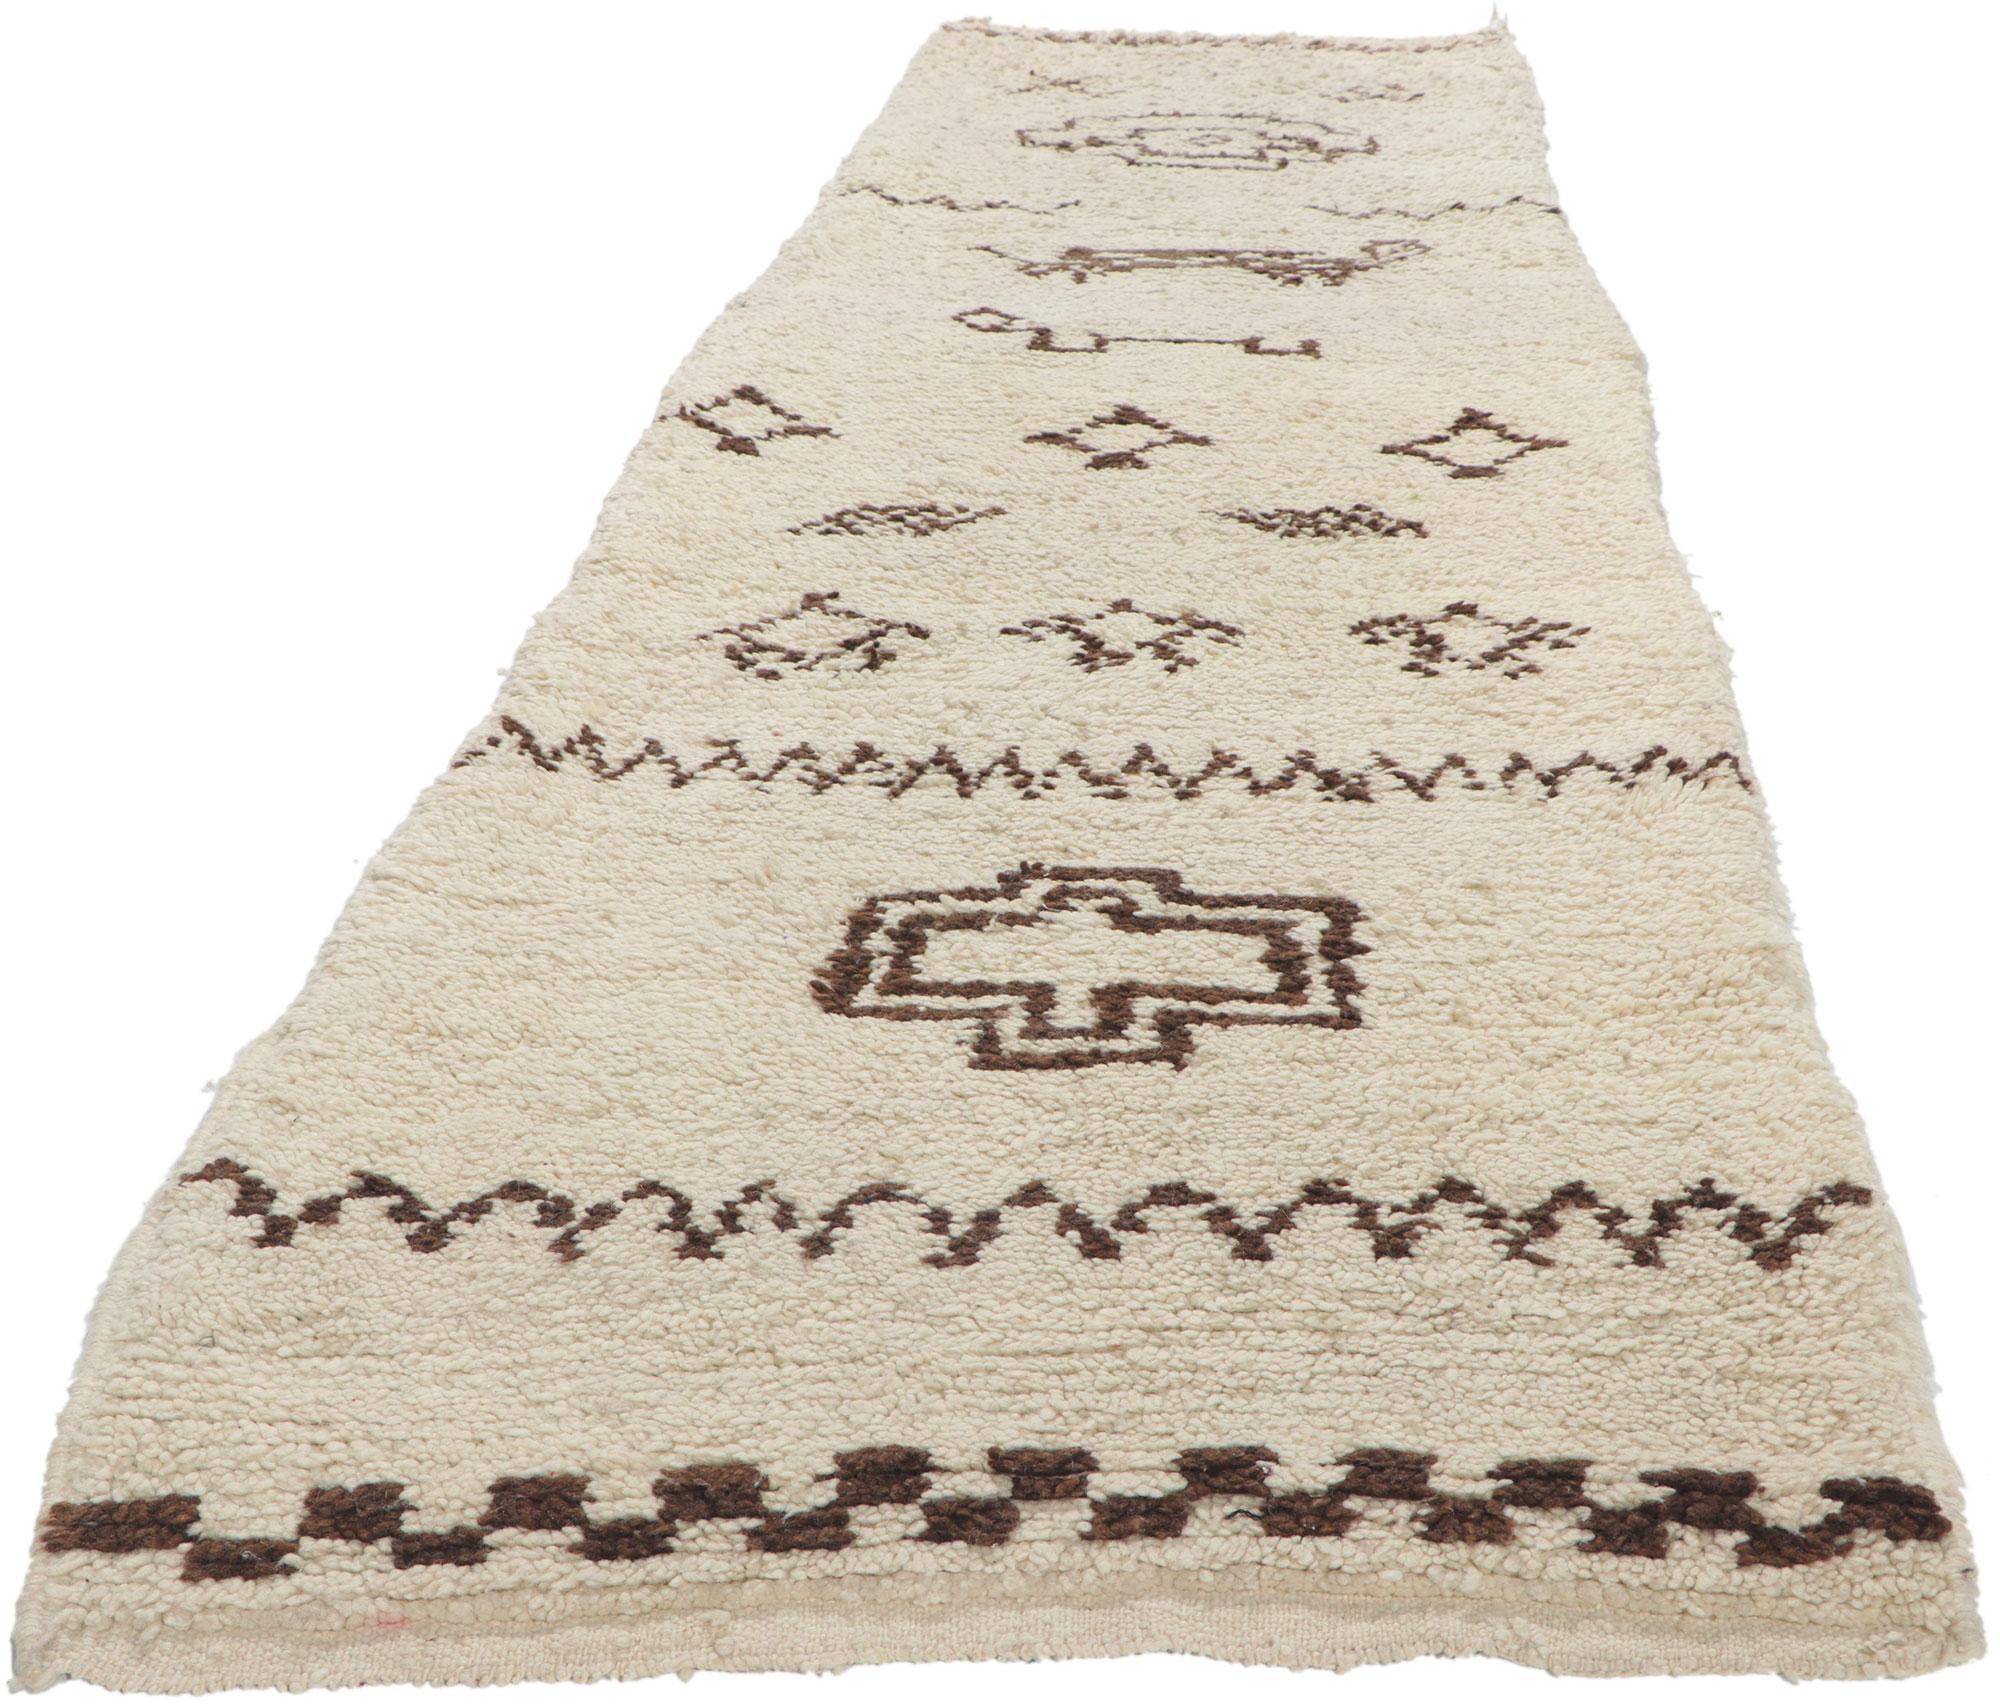 Tribal Vintage Moroccan Beni Ourain Runner For Sale